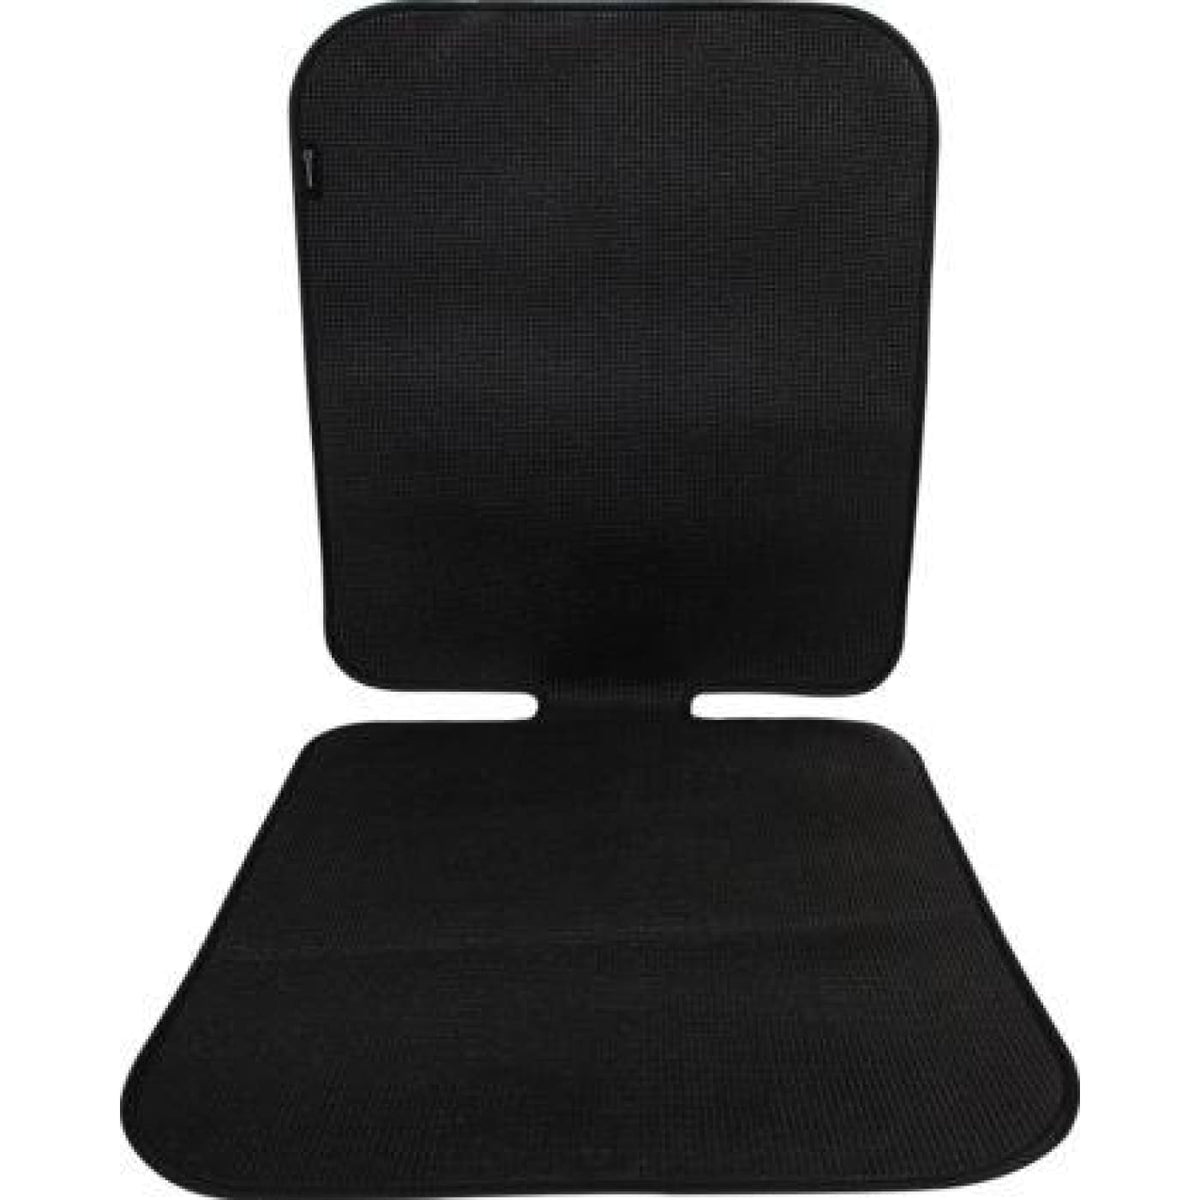 InfaSecure Non-Slip Seat Protector - CAR SEATS - SEAT PROTECTORS/MIRRORS/STORAGE